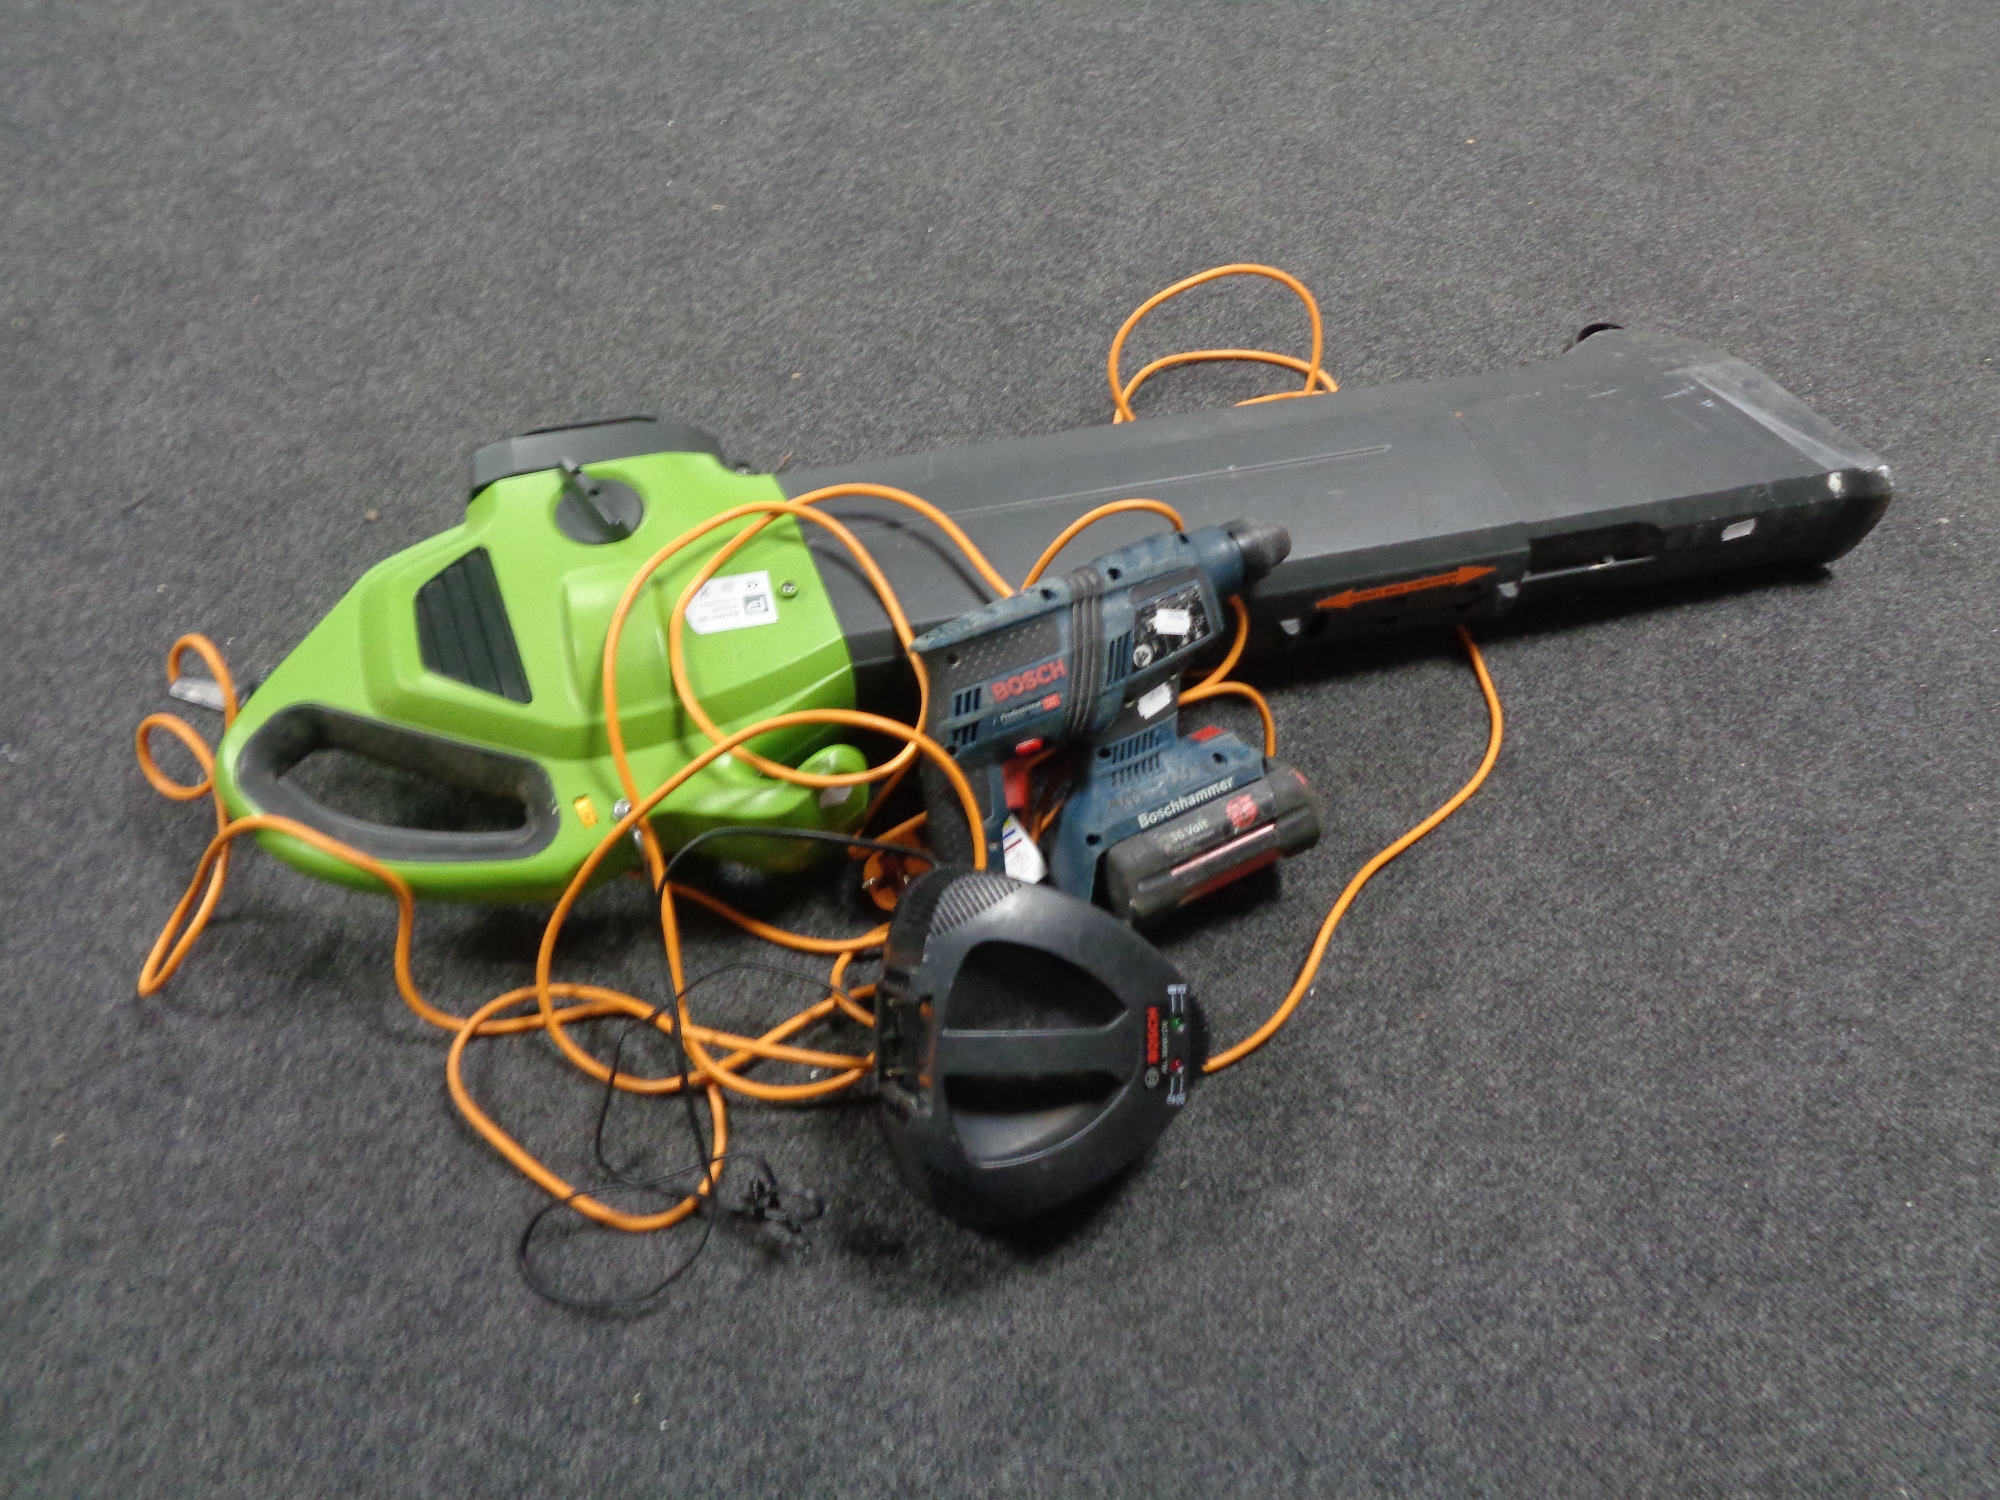 A Performance blower vacuum together with a Bosch 36 volt electric drill with battery and charger.